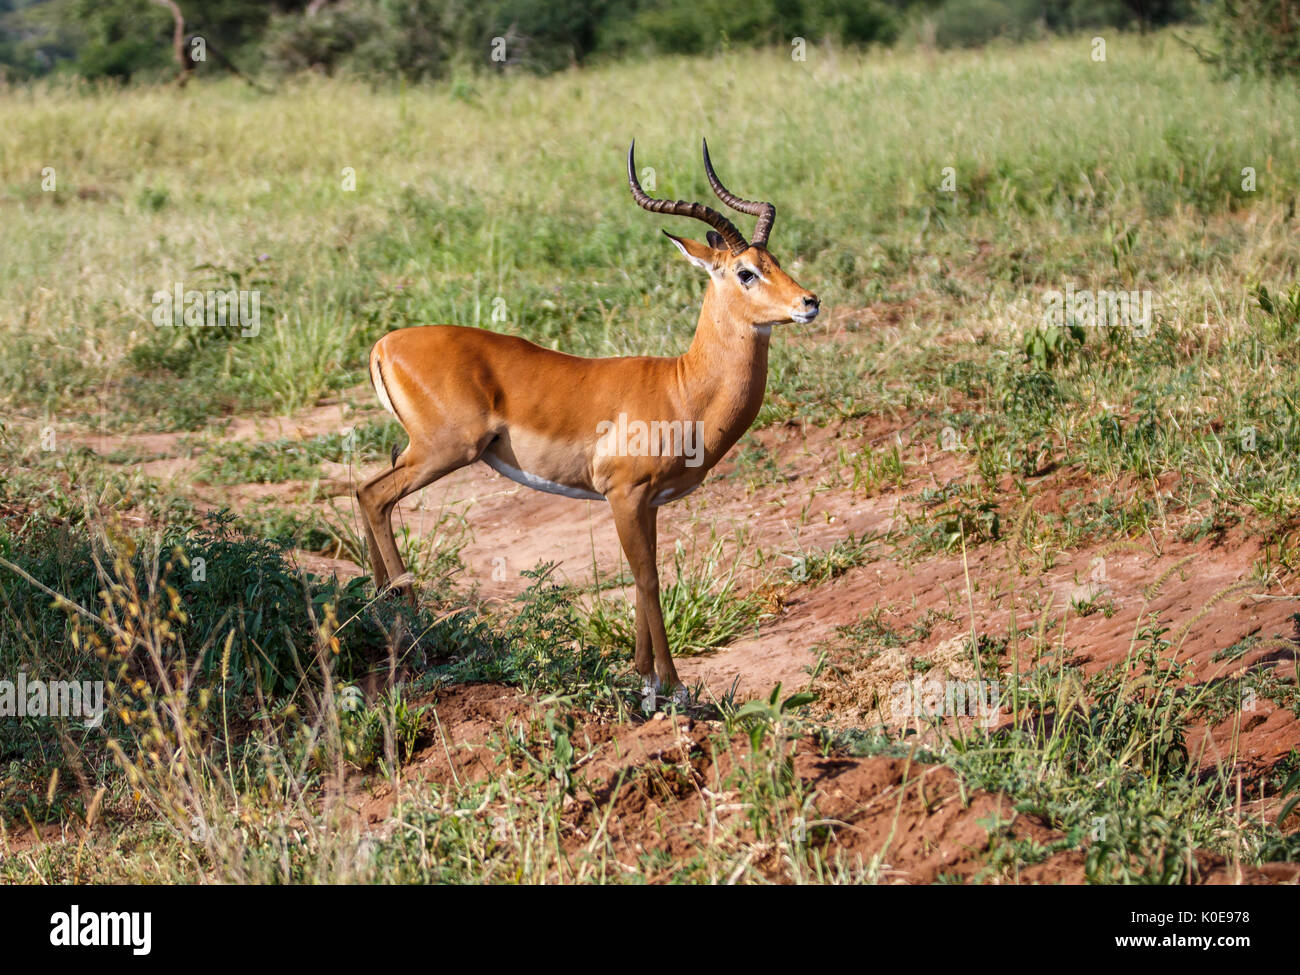 The impala is a medium-sized antelope found in eastern and southern Africa. Stock Photo